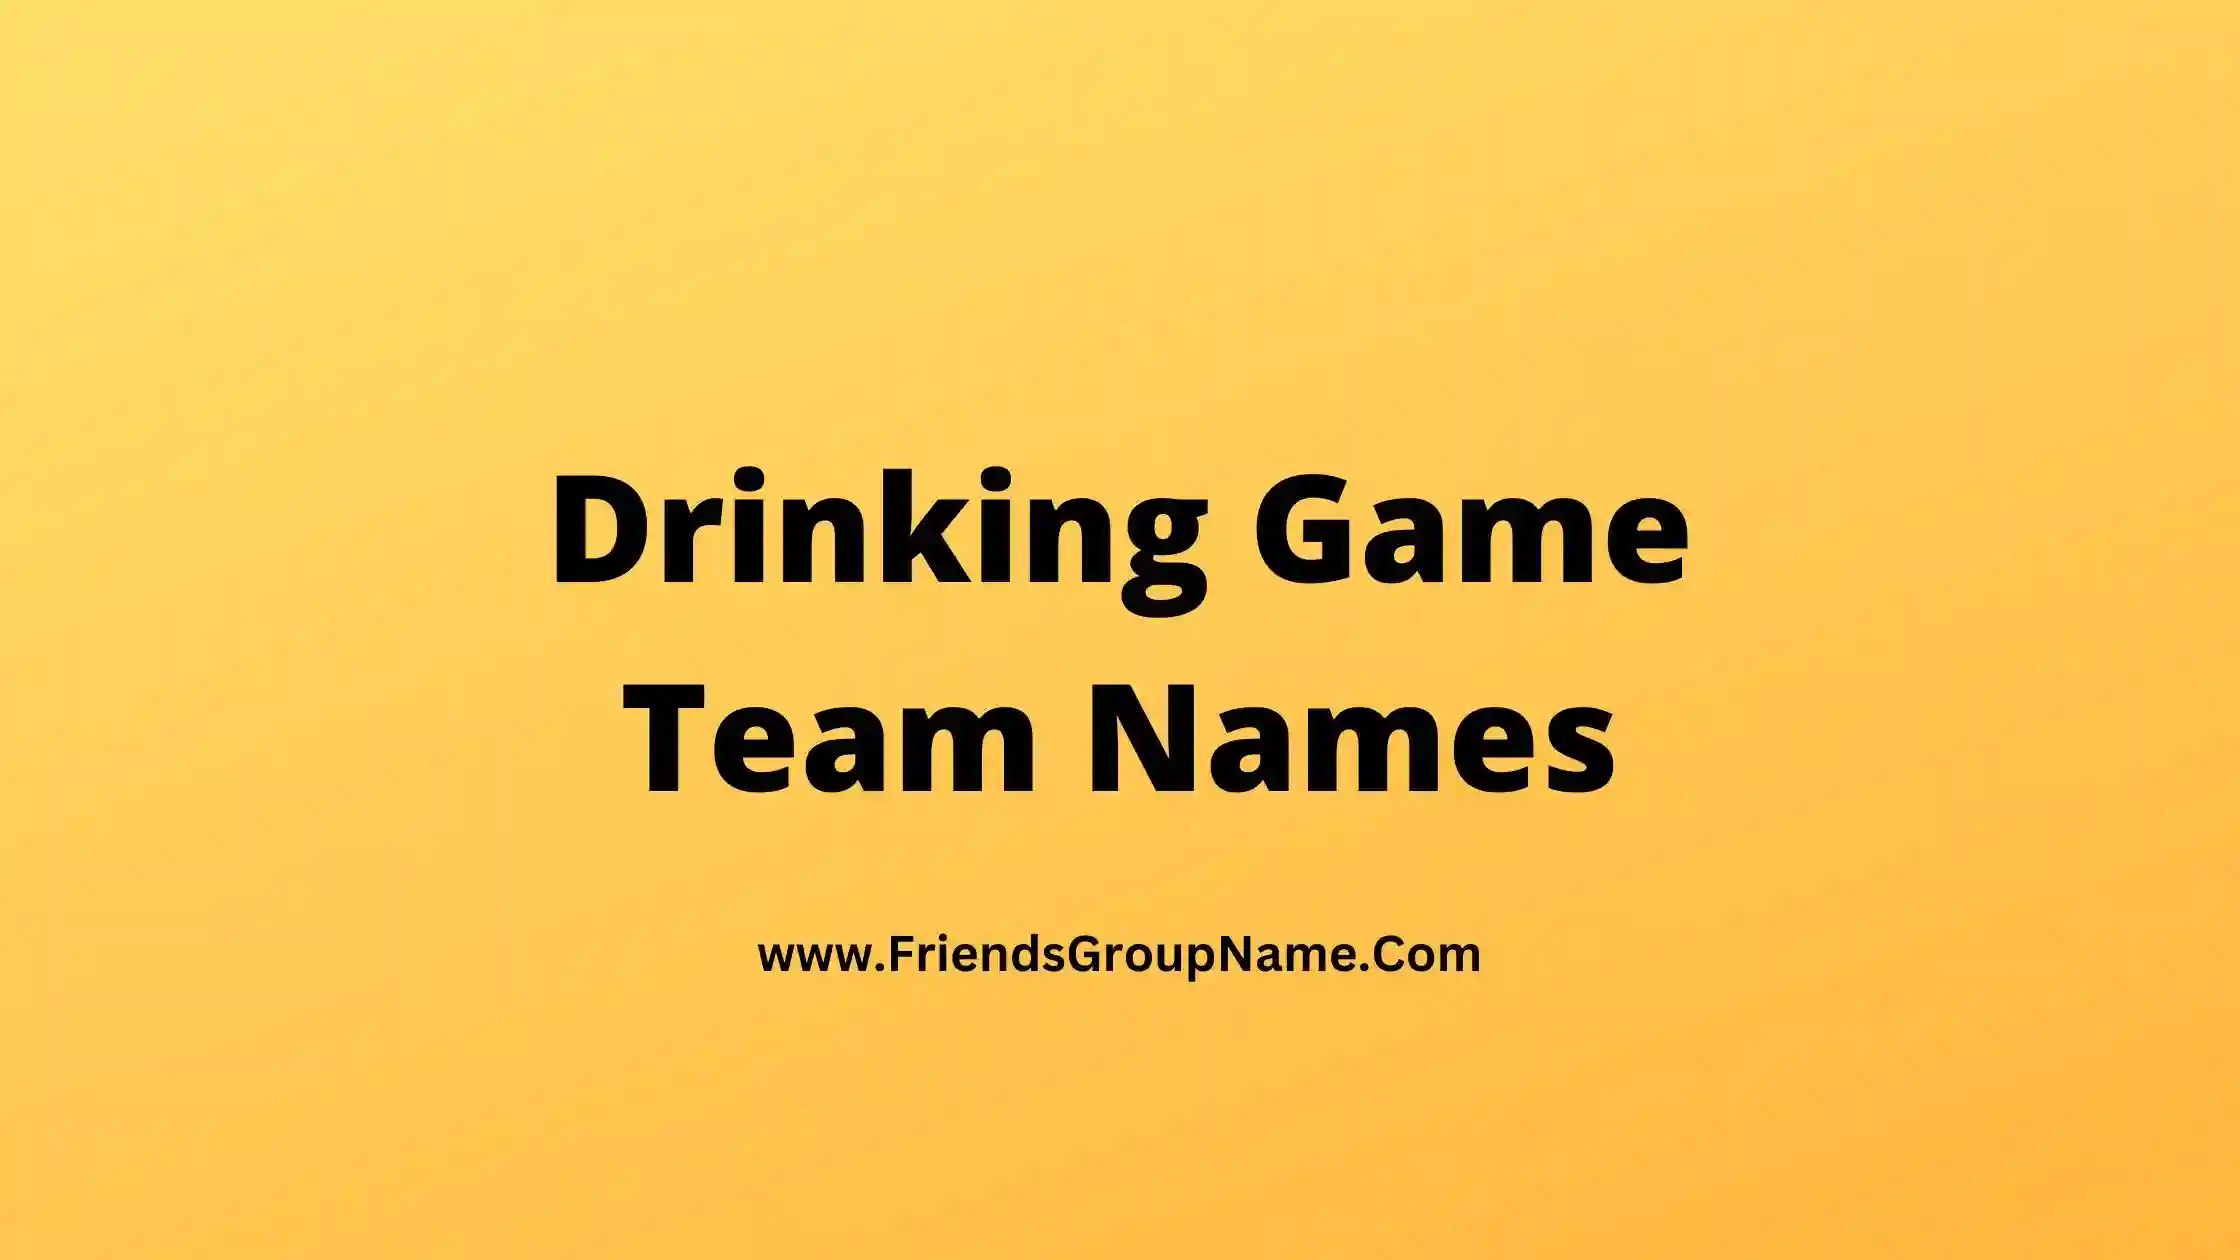 Drinking Game Team Names